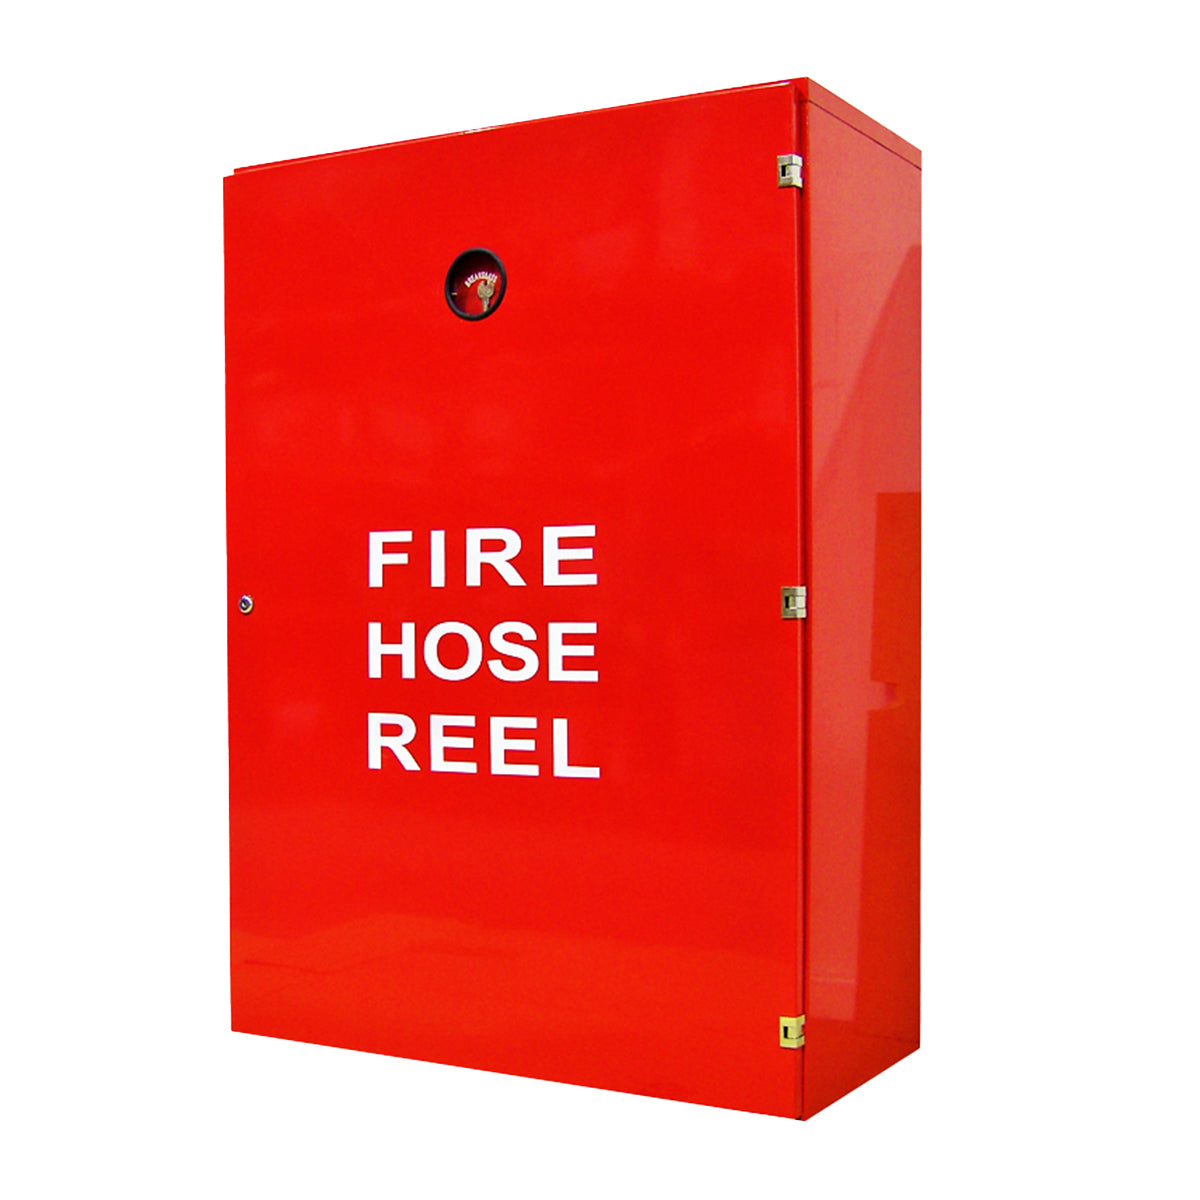 Fire hose reel cabinet with break glass & 003Lock - Premium Hose Reel Cabinets from Wolf - Shop now at Firebox Australia